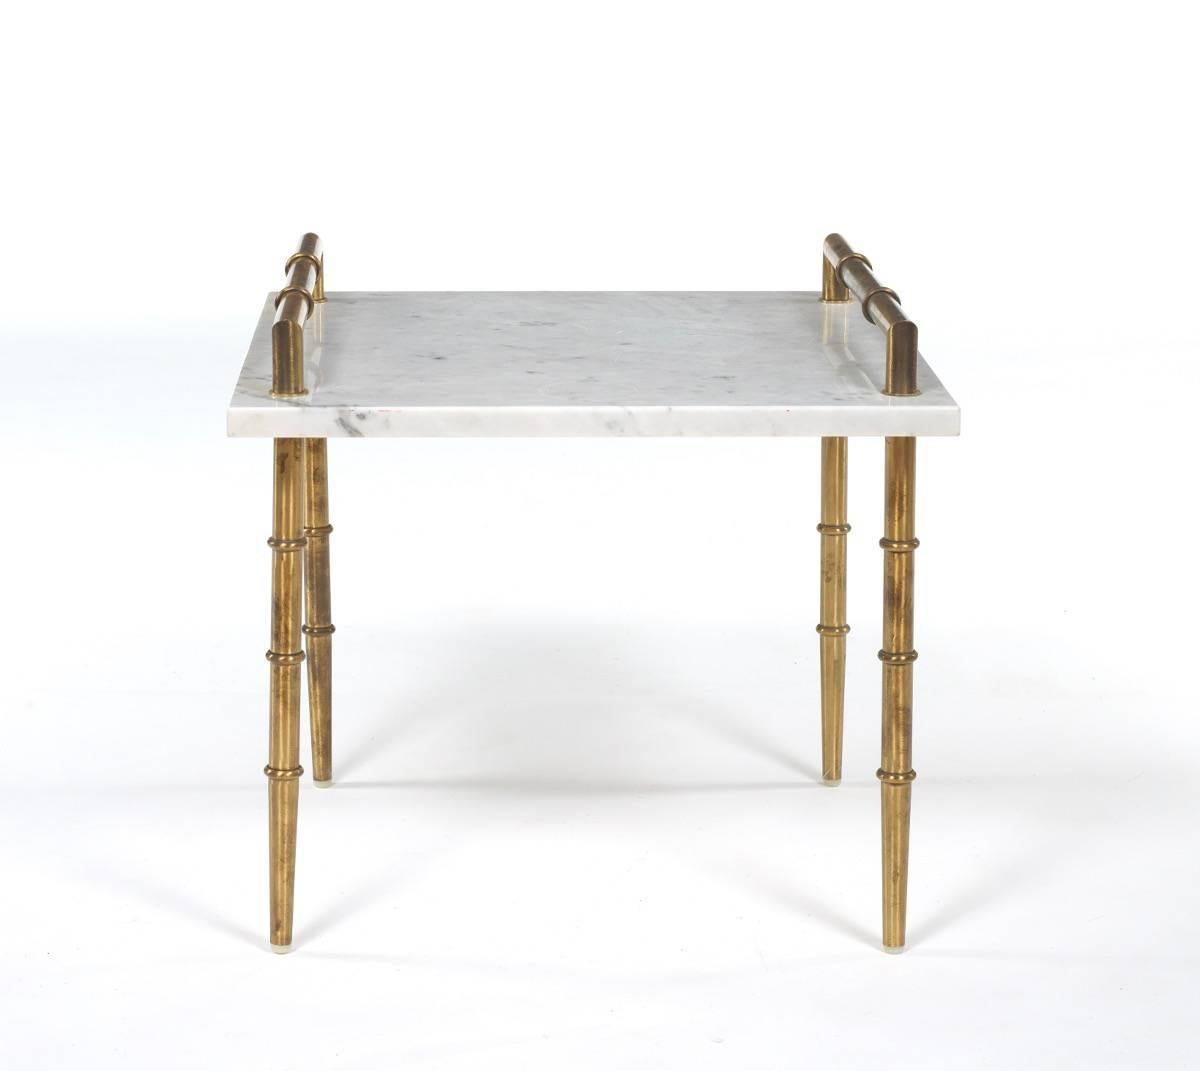 Italian Mid-Century bamboo motif side table, stylish table with Carrara marble and brass mounts. The two handles measure 2 inches high x 17